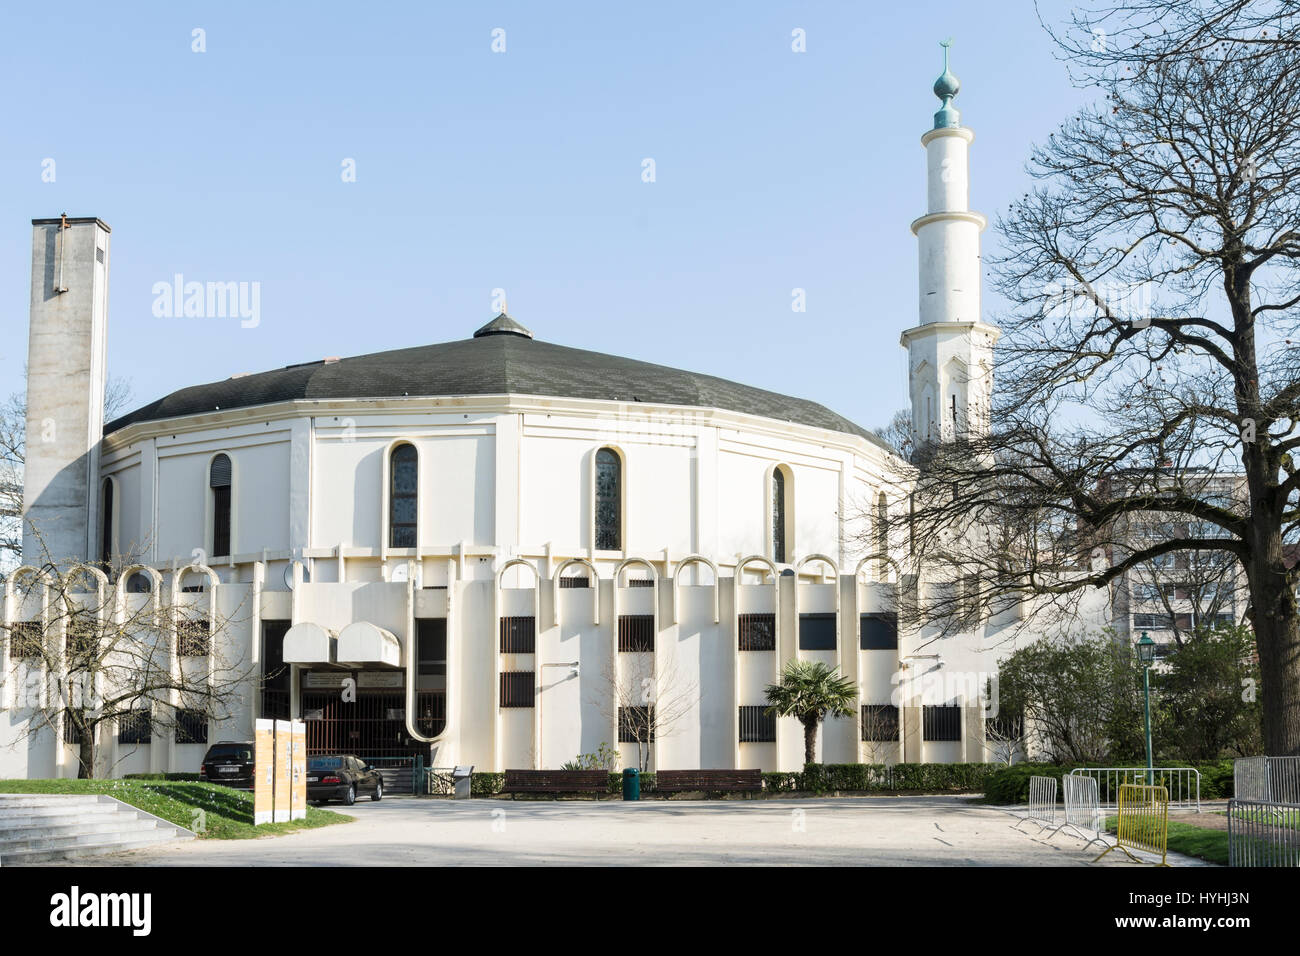 The mosque in Brussels Stock Photo